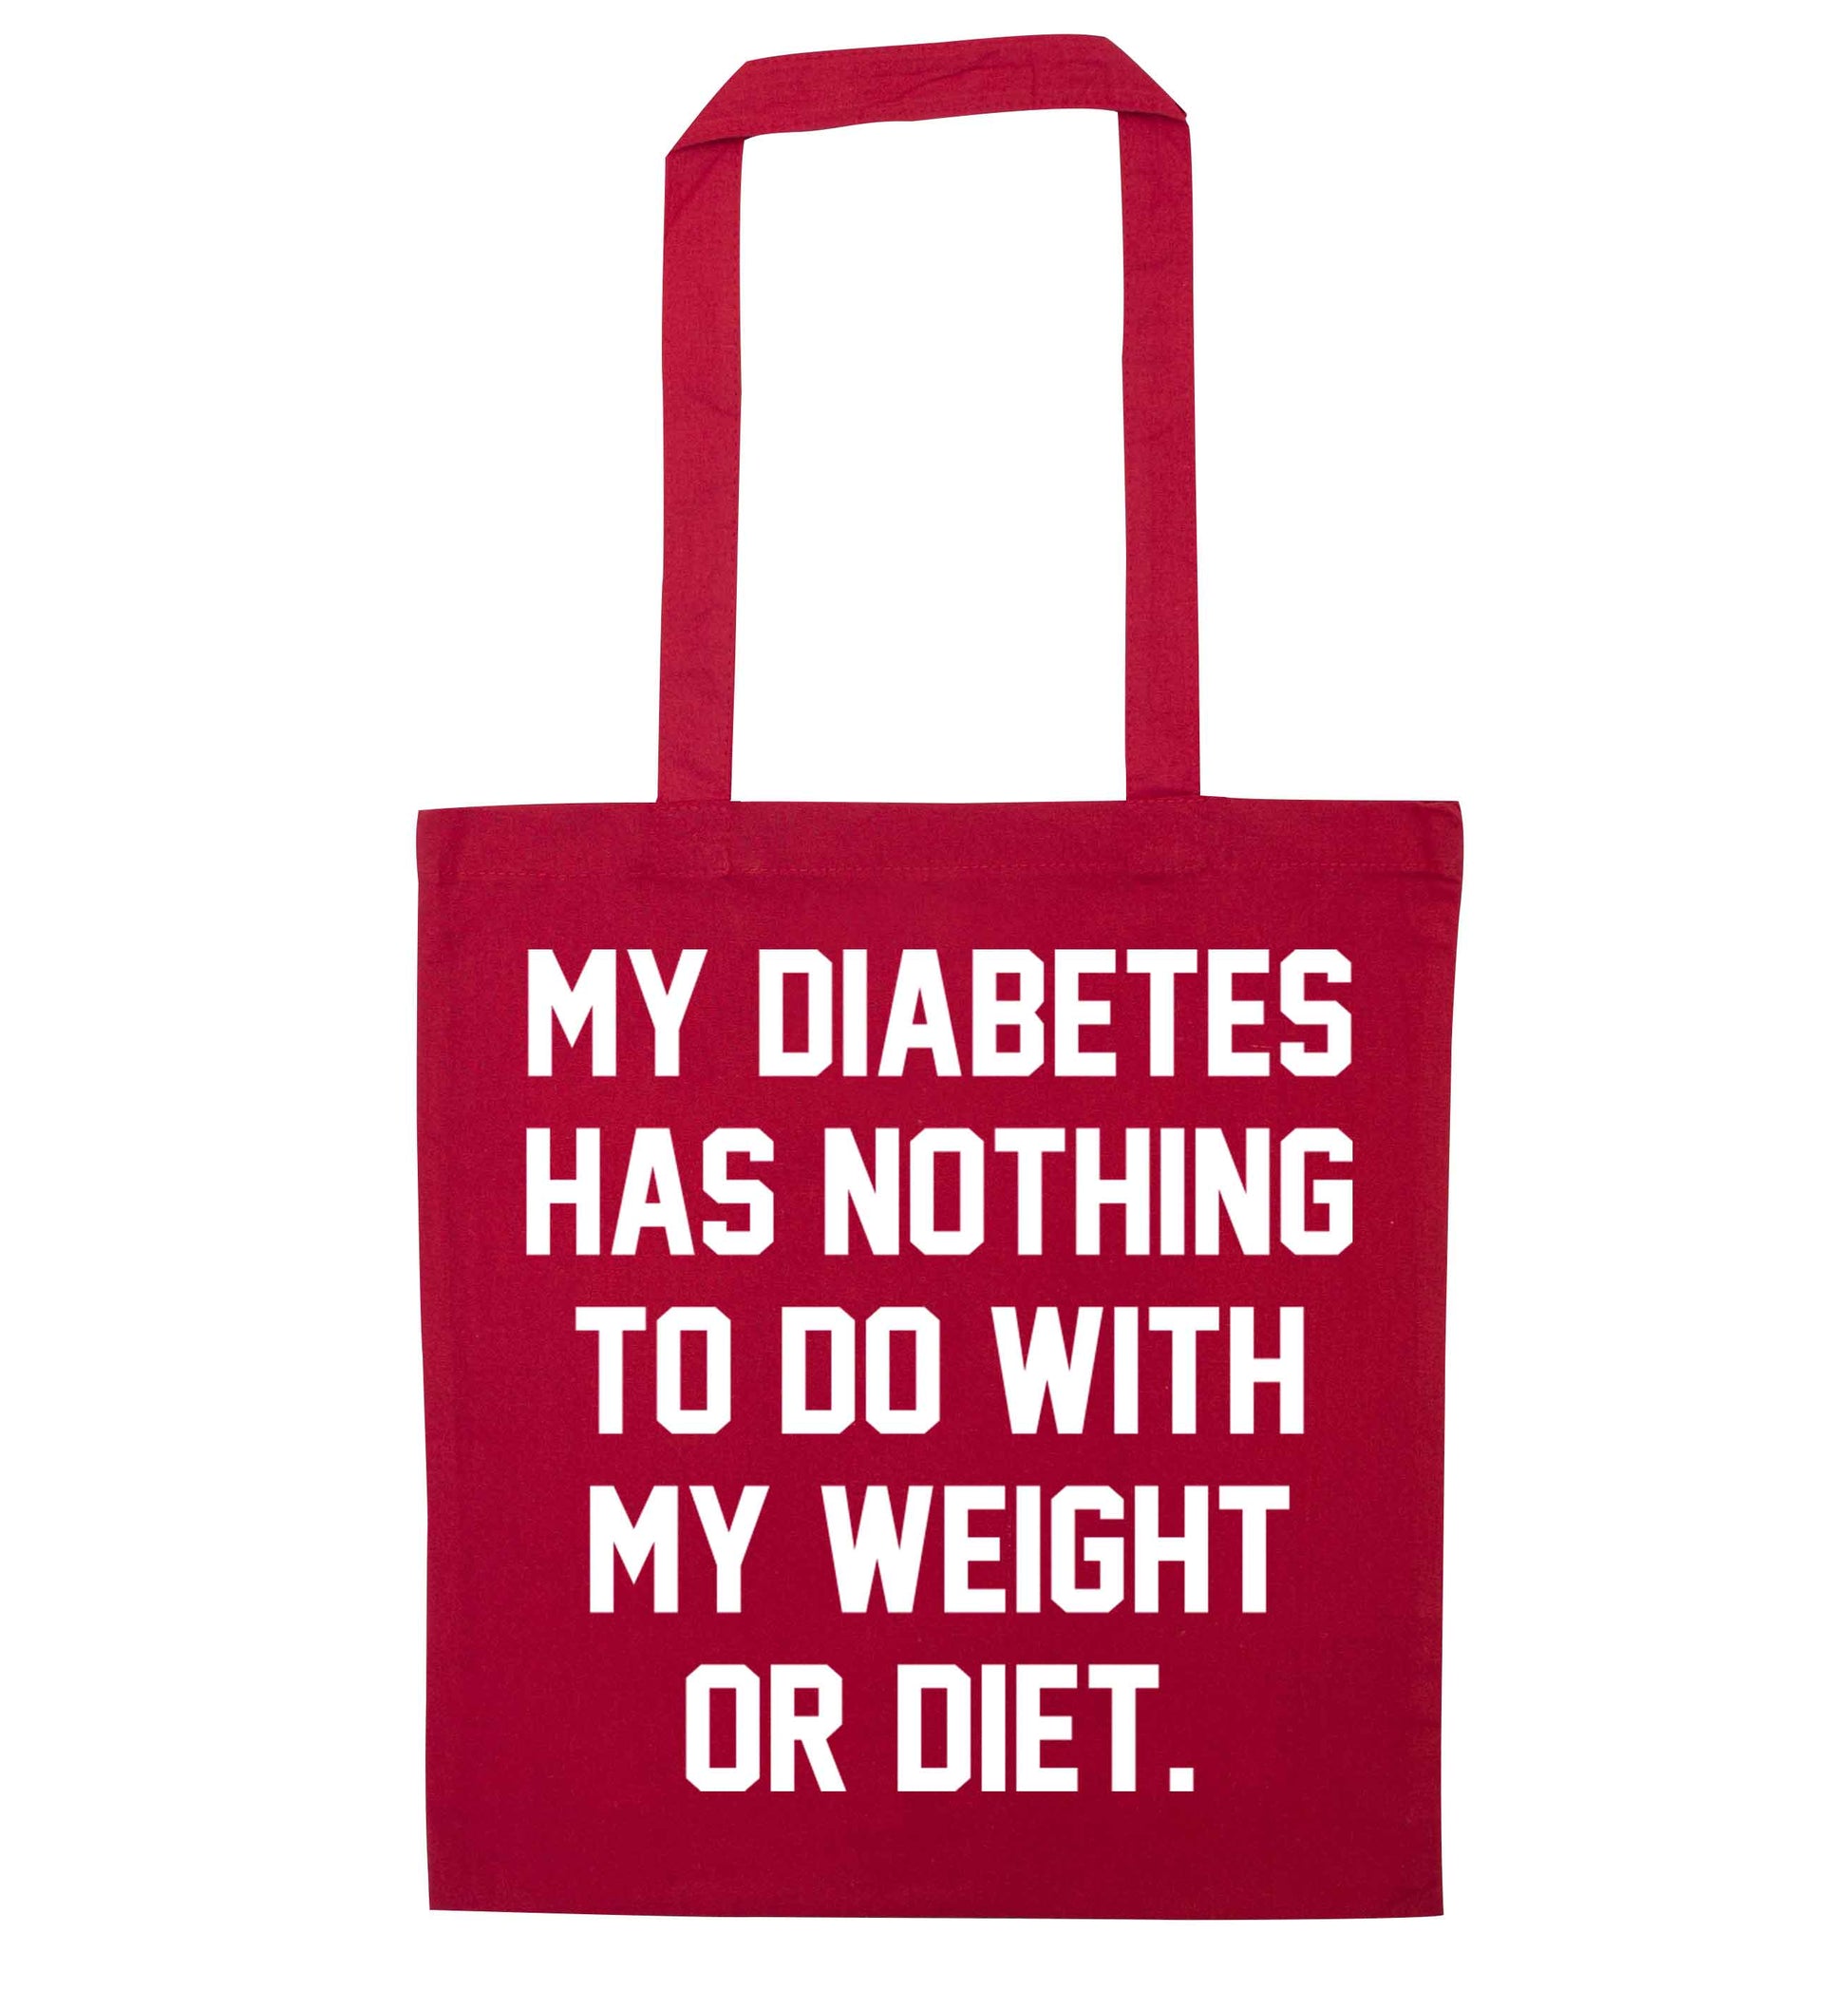 My diabetes has nothing to do with my weight or diet red tote bag